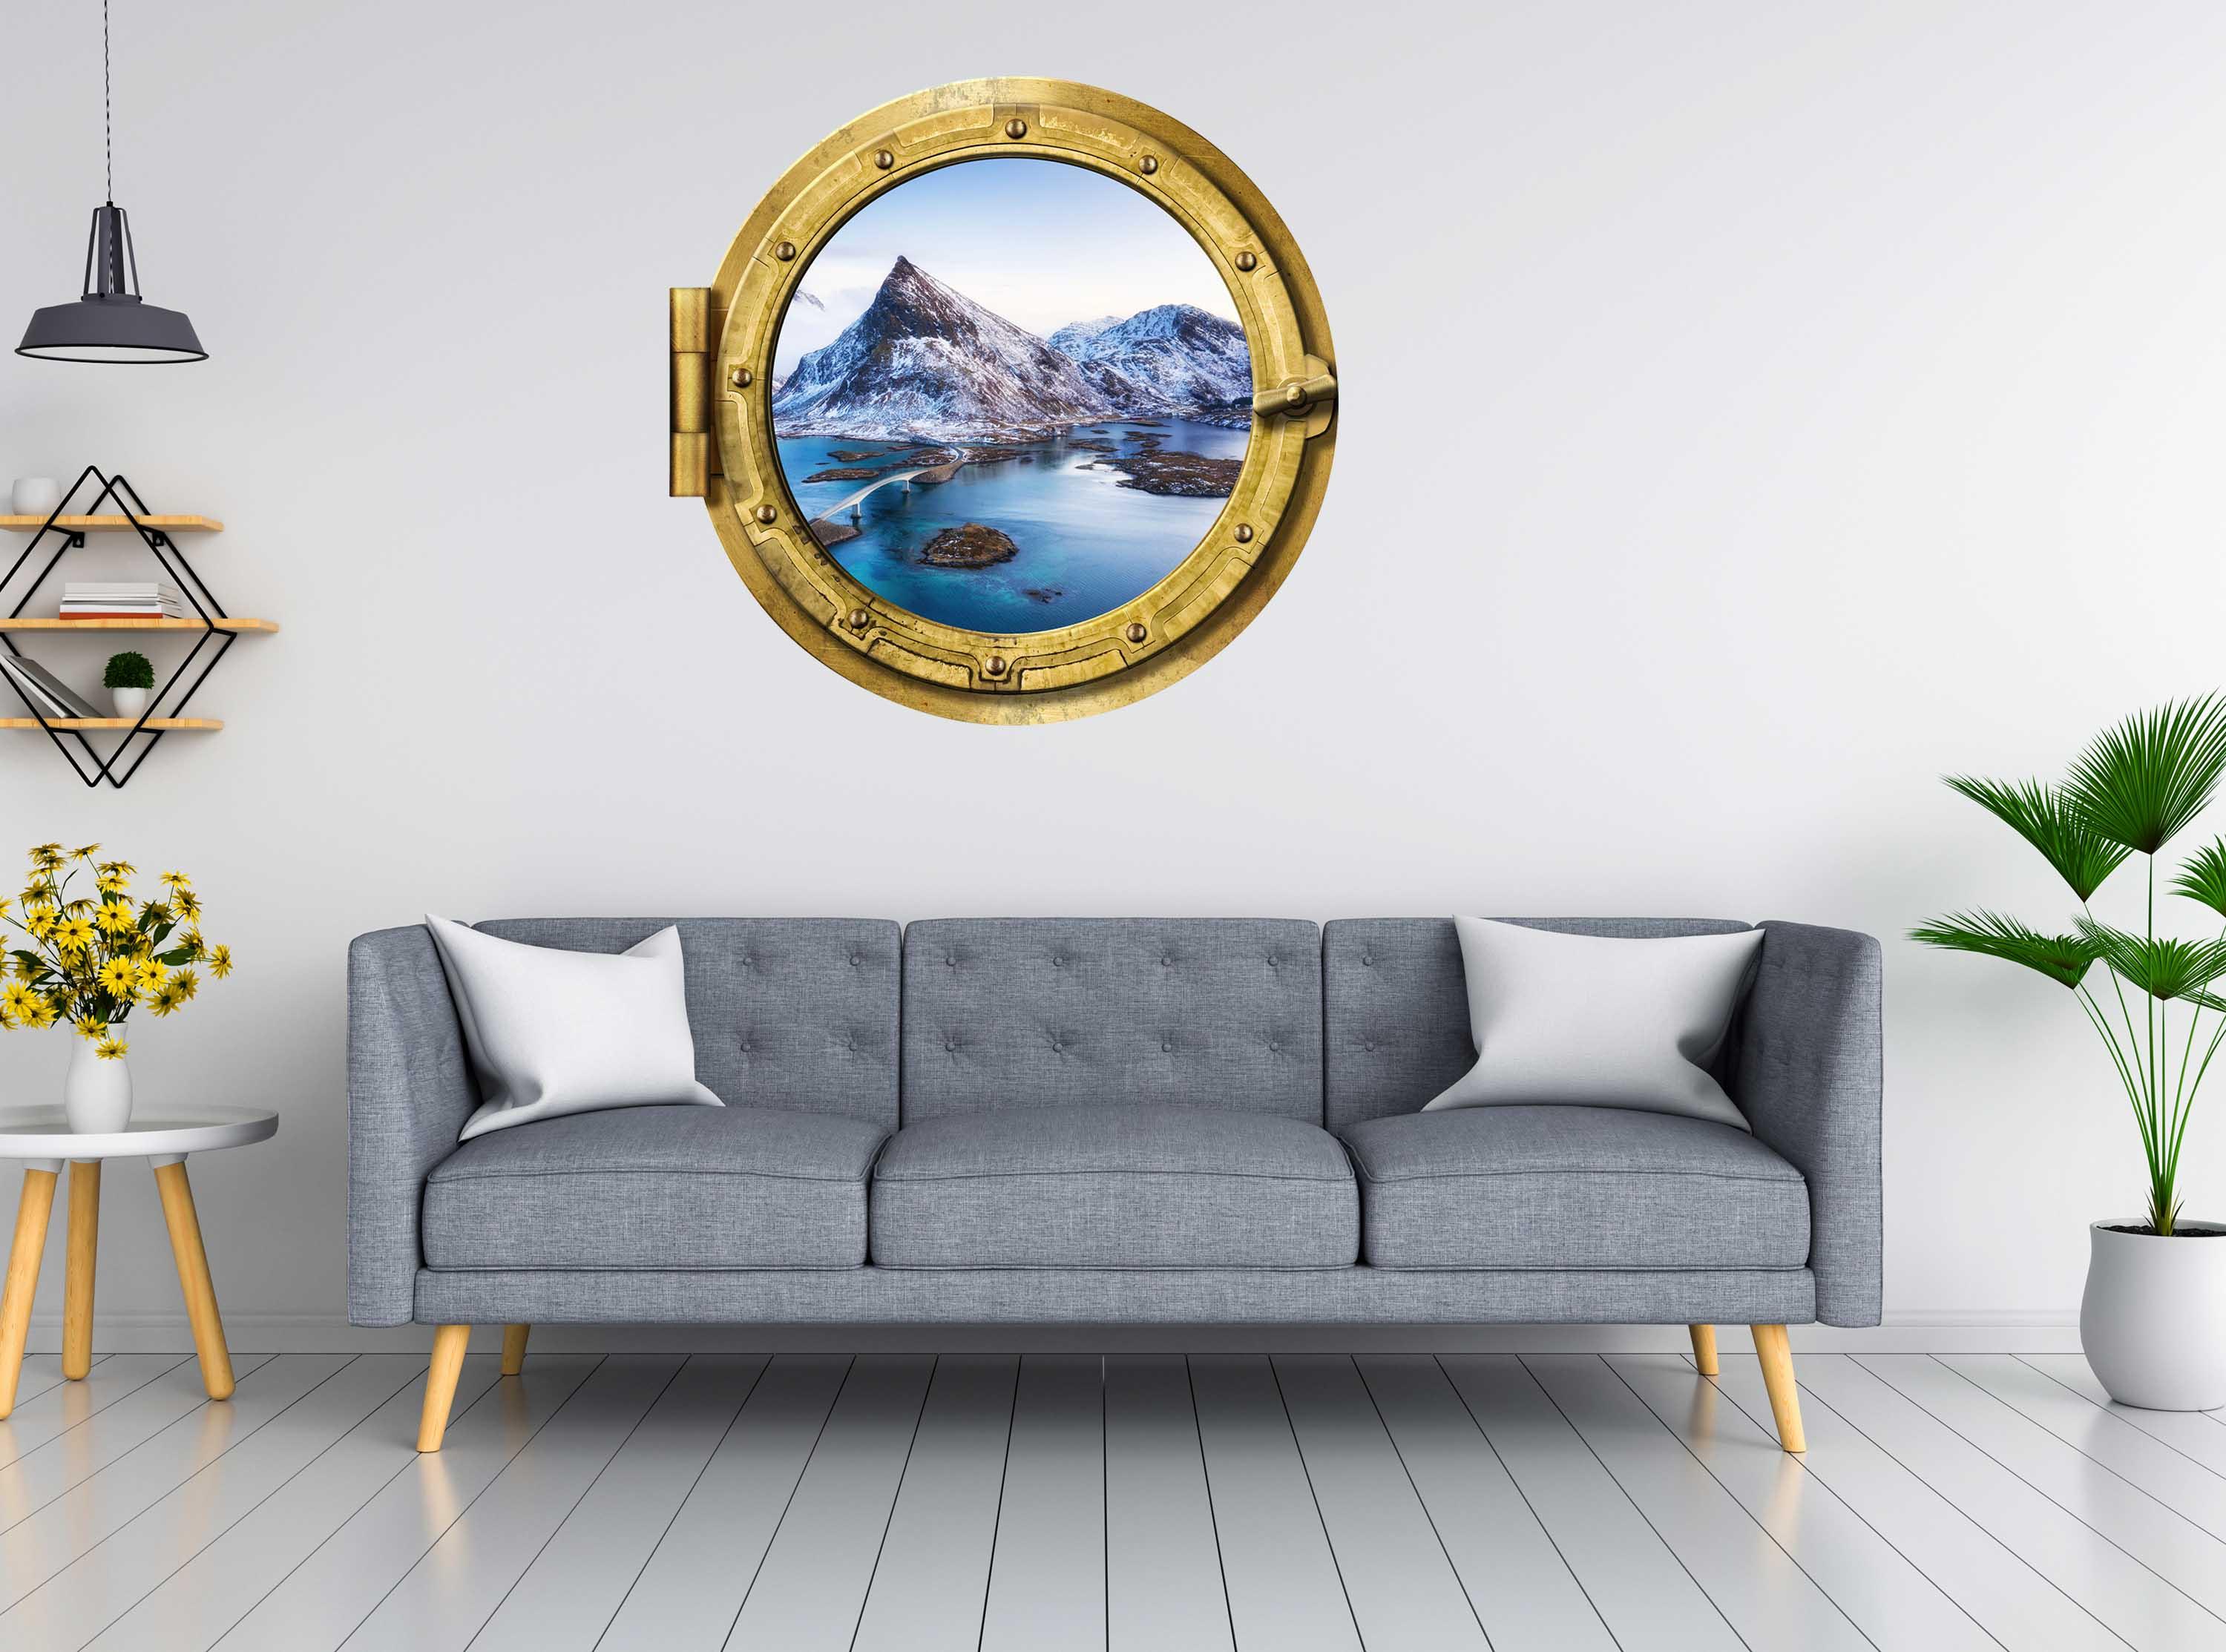 Mountains with Blue lake and a bridge Window #002, Removable wall decal